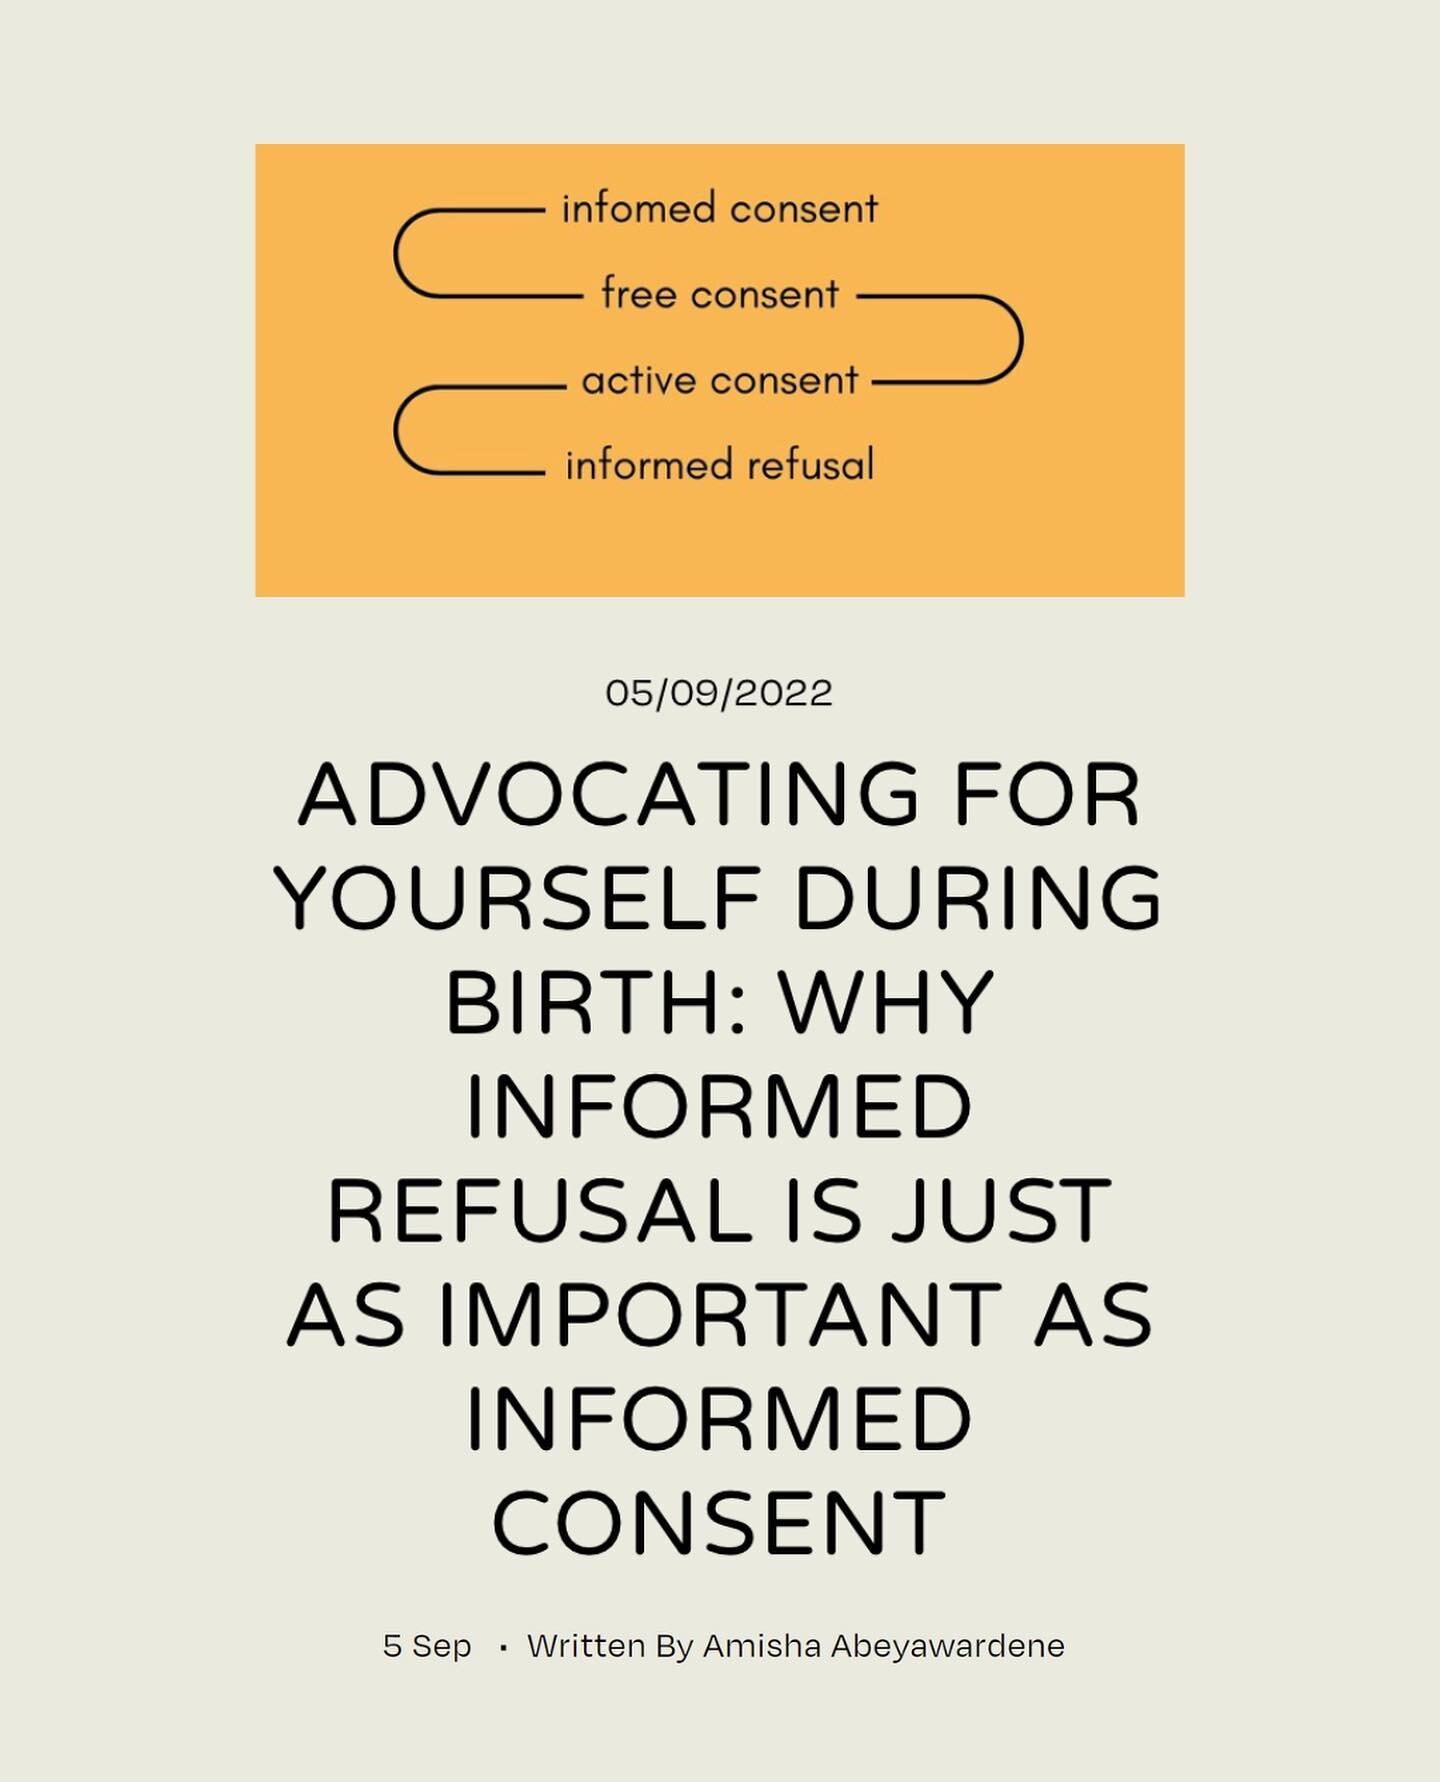 🔗 New Blog Alert 🔗

Ahead of my workshop this Sunday, I&rsquo;ve written a blog about advocating for yourself during birth: why informed refusal is just as important as informed consent.

Link in bio to read the full thing!
&bull;
&bull;
&bull;
&bu